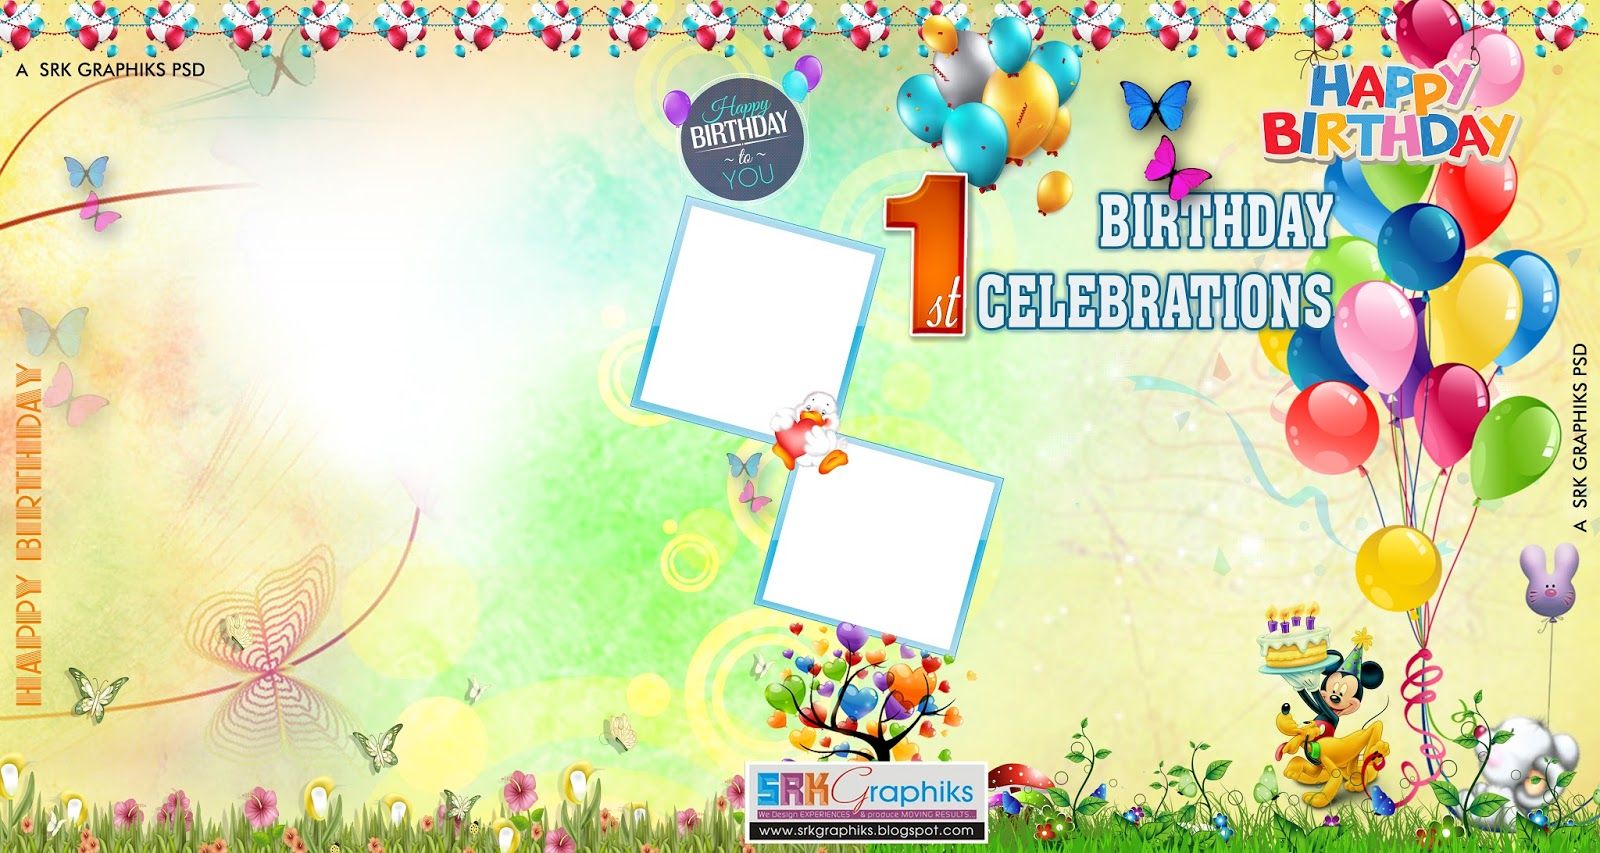 Psd Birthday Background For Photohop Free Download